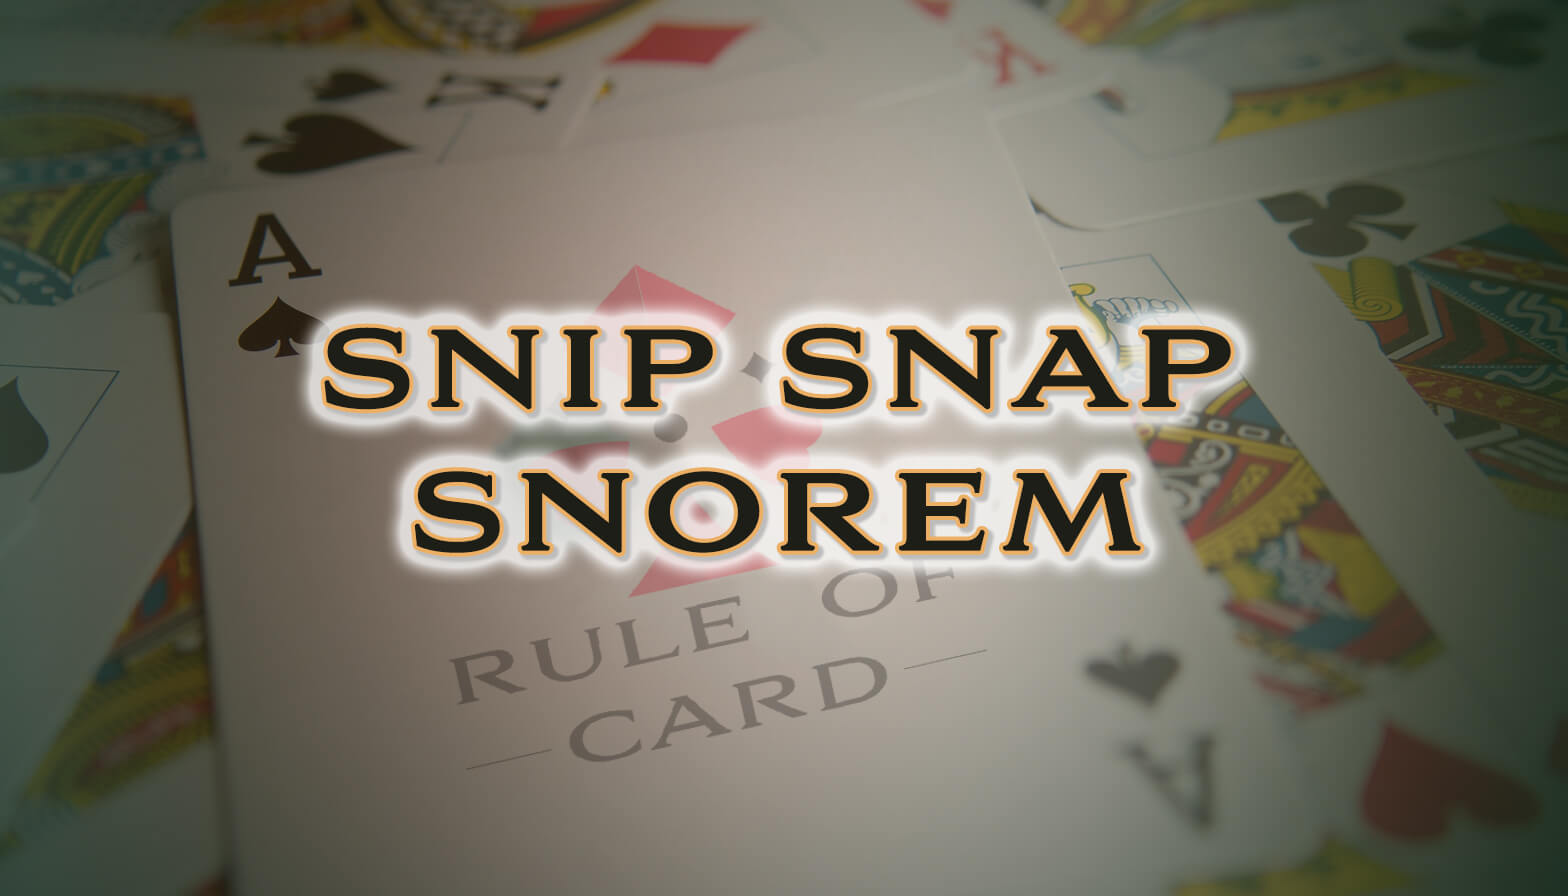 Playing the card game Snip Snap Snorem